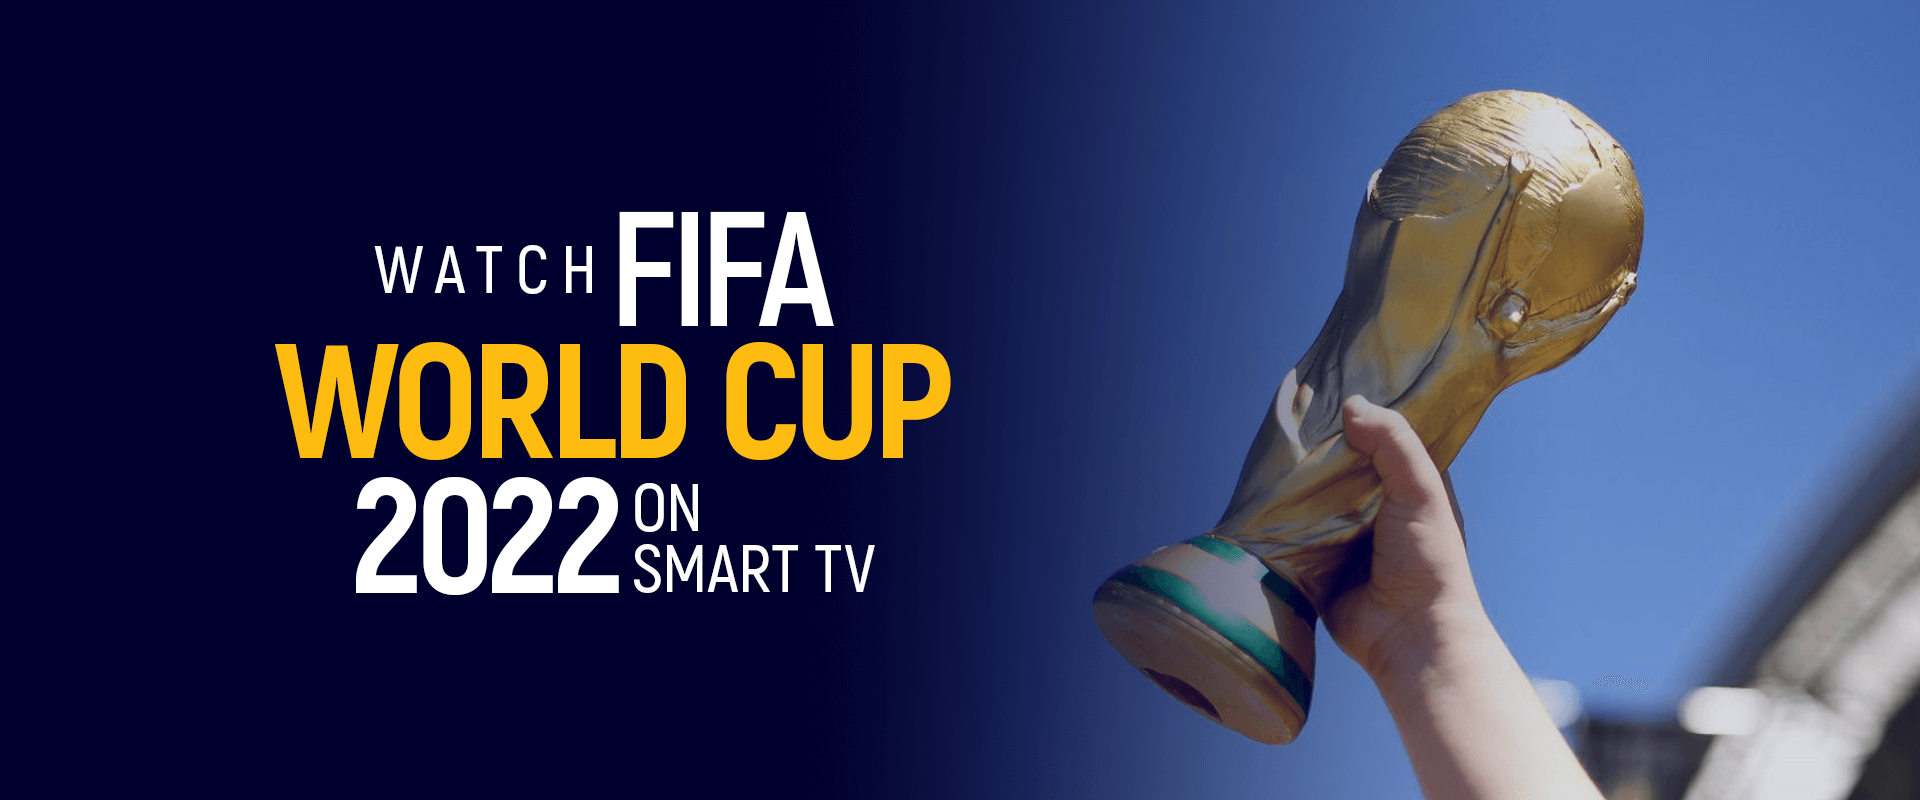 world cup 2022 tv